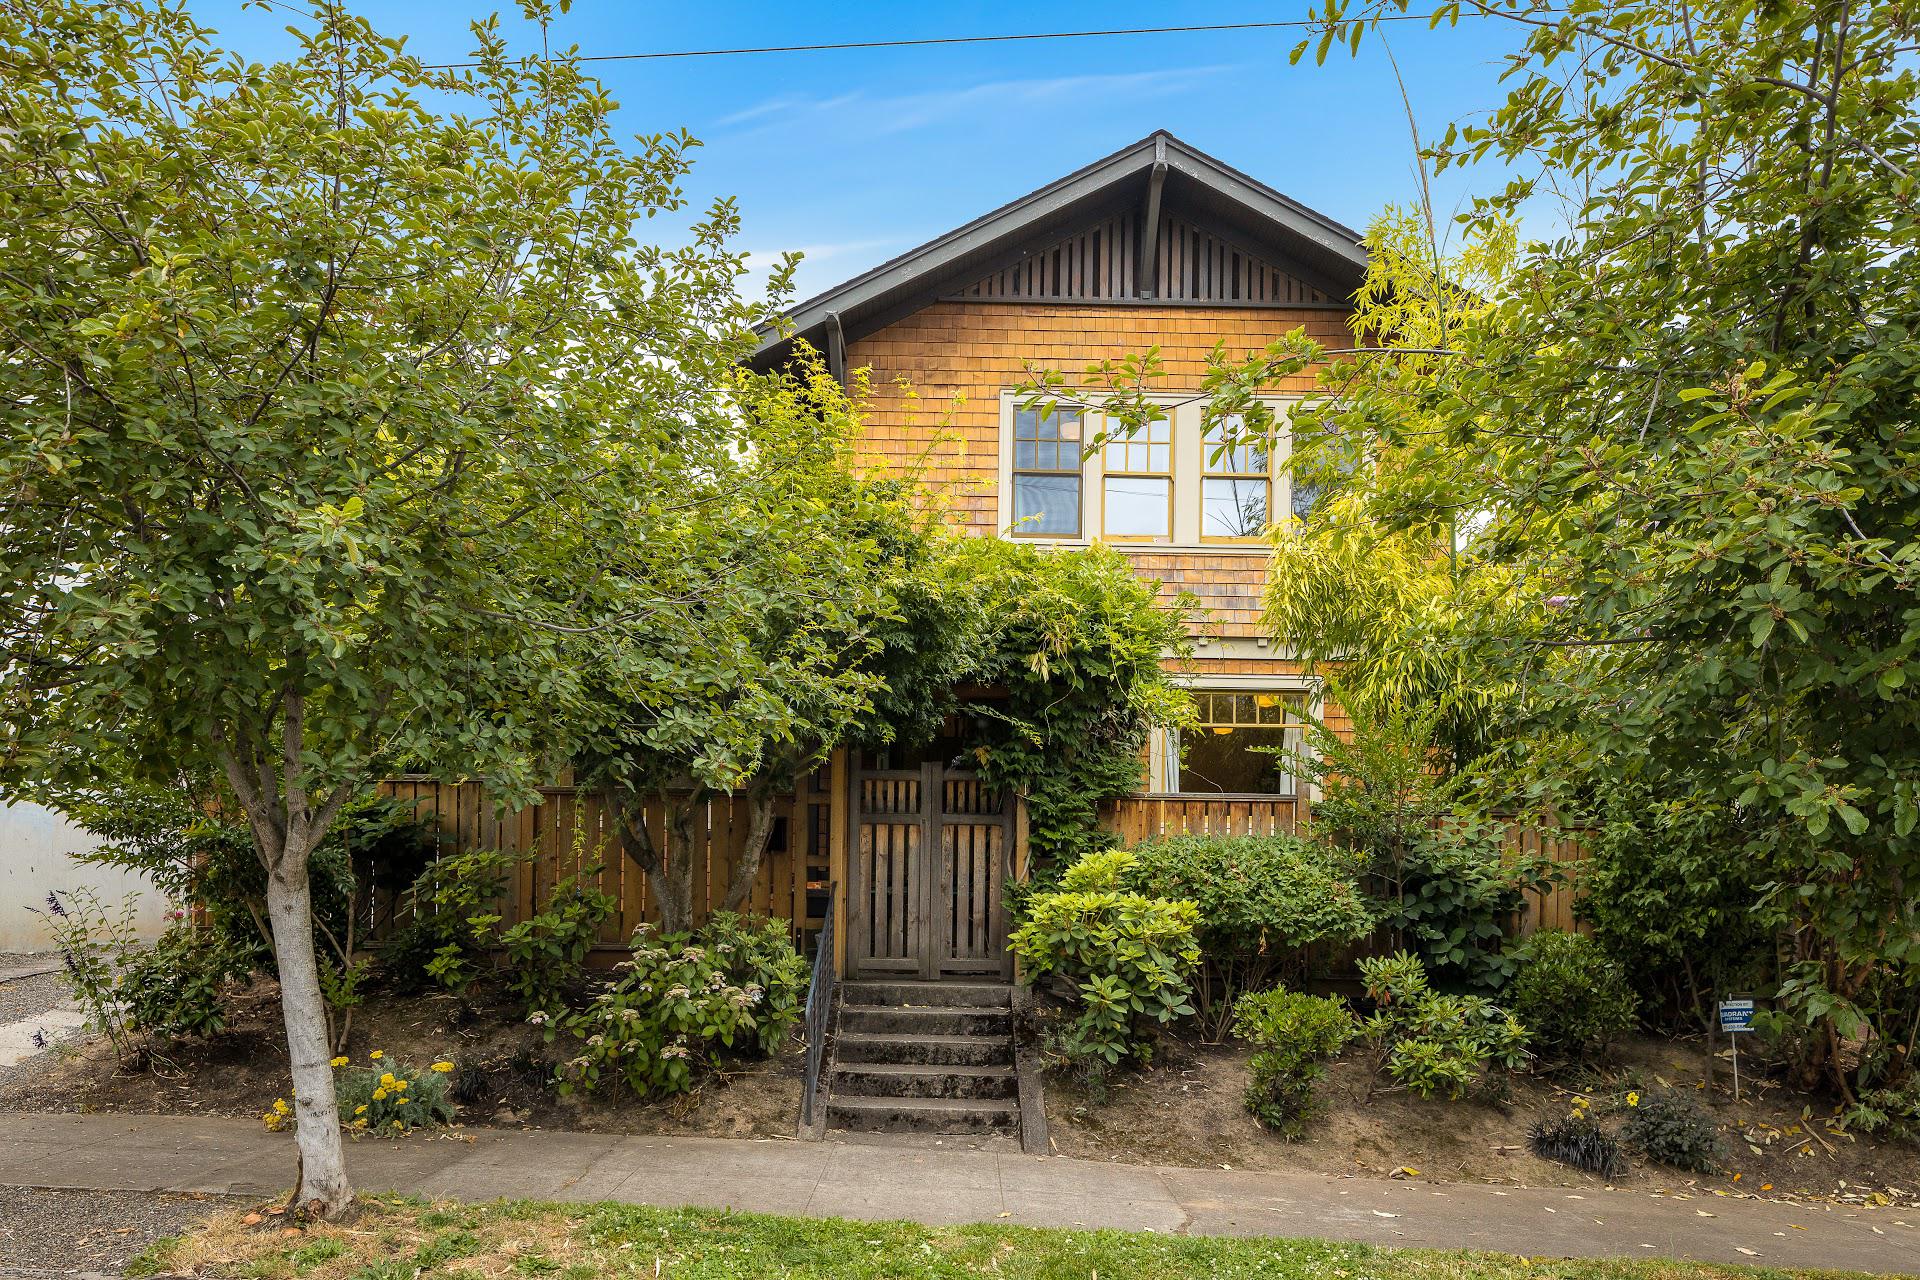 Listed & Sold- Dialed Craftsman in the Heart of the City